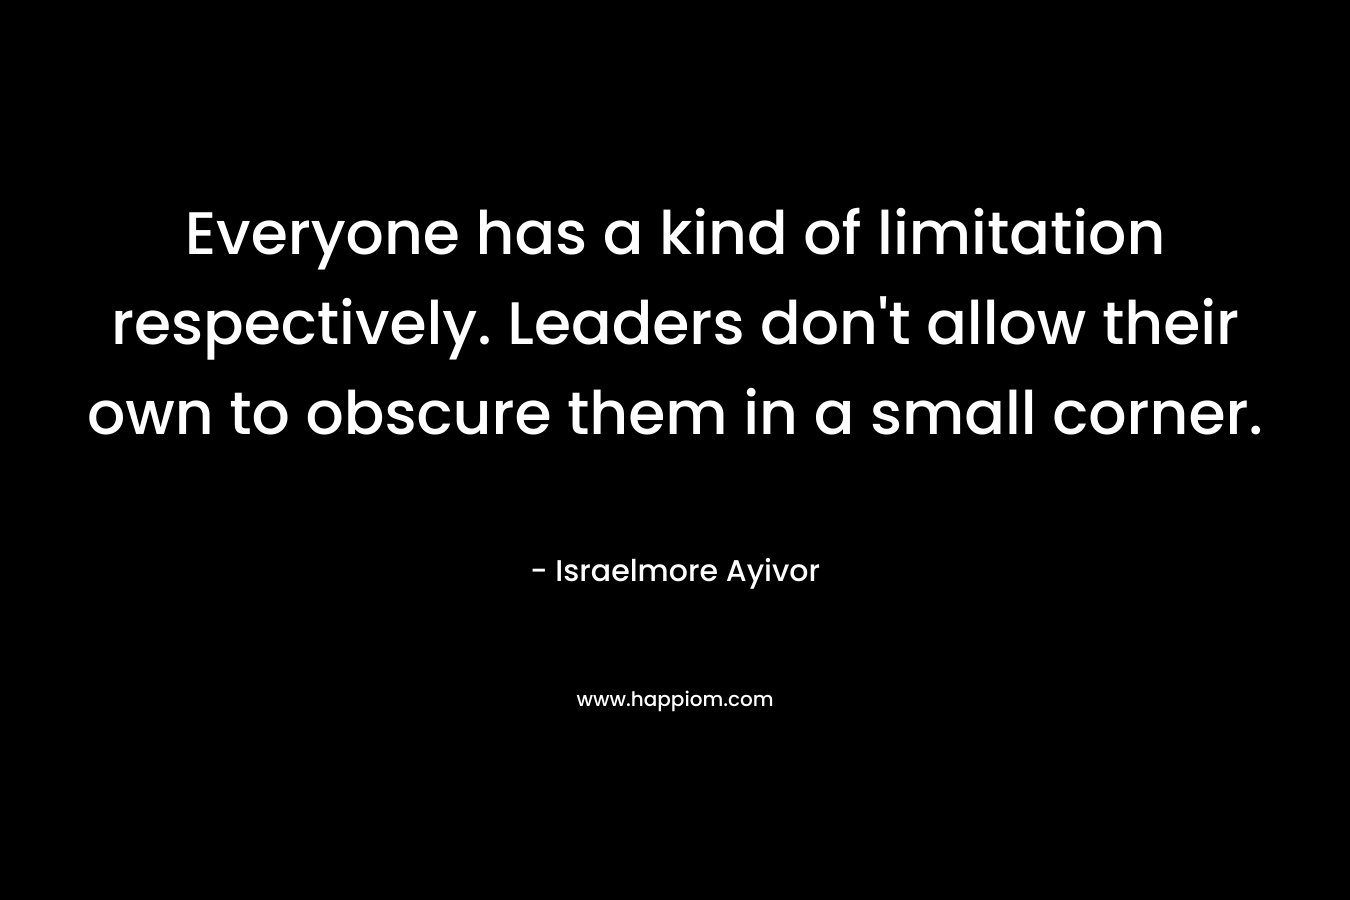 Everyone has a kind of limitation respectively. Leaders don't allow their own to obscure them in a small corner.